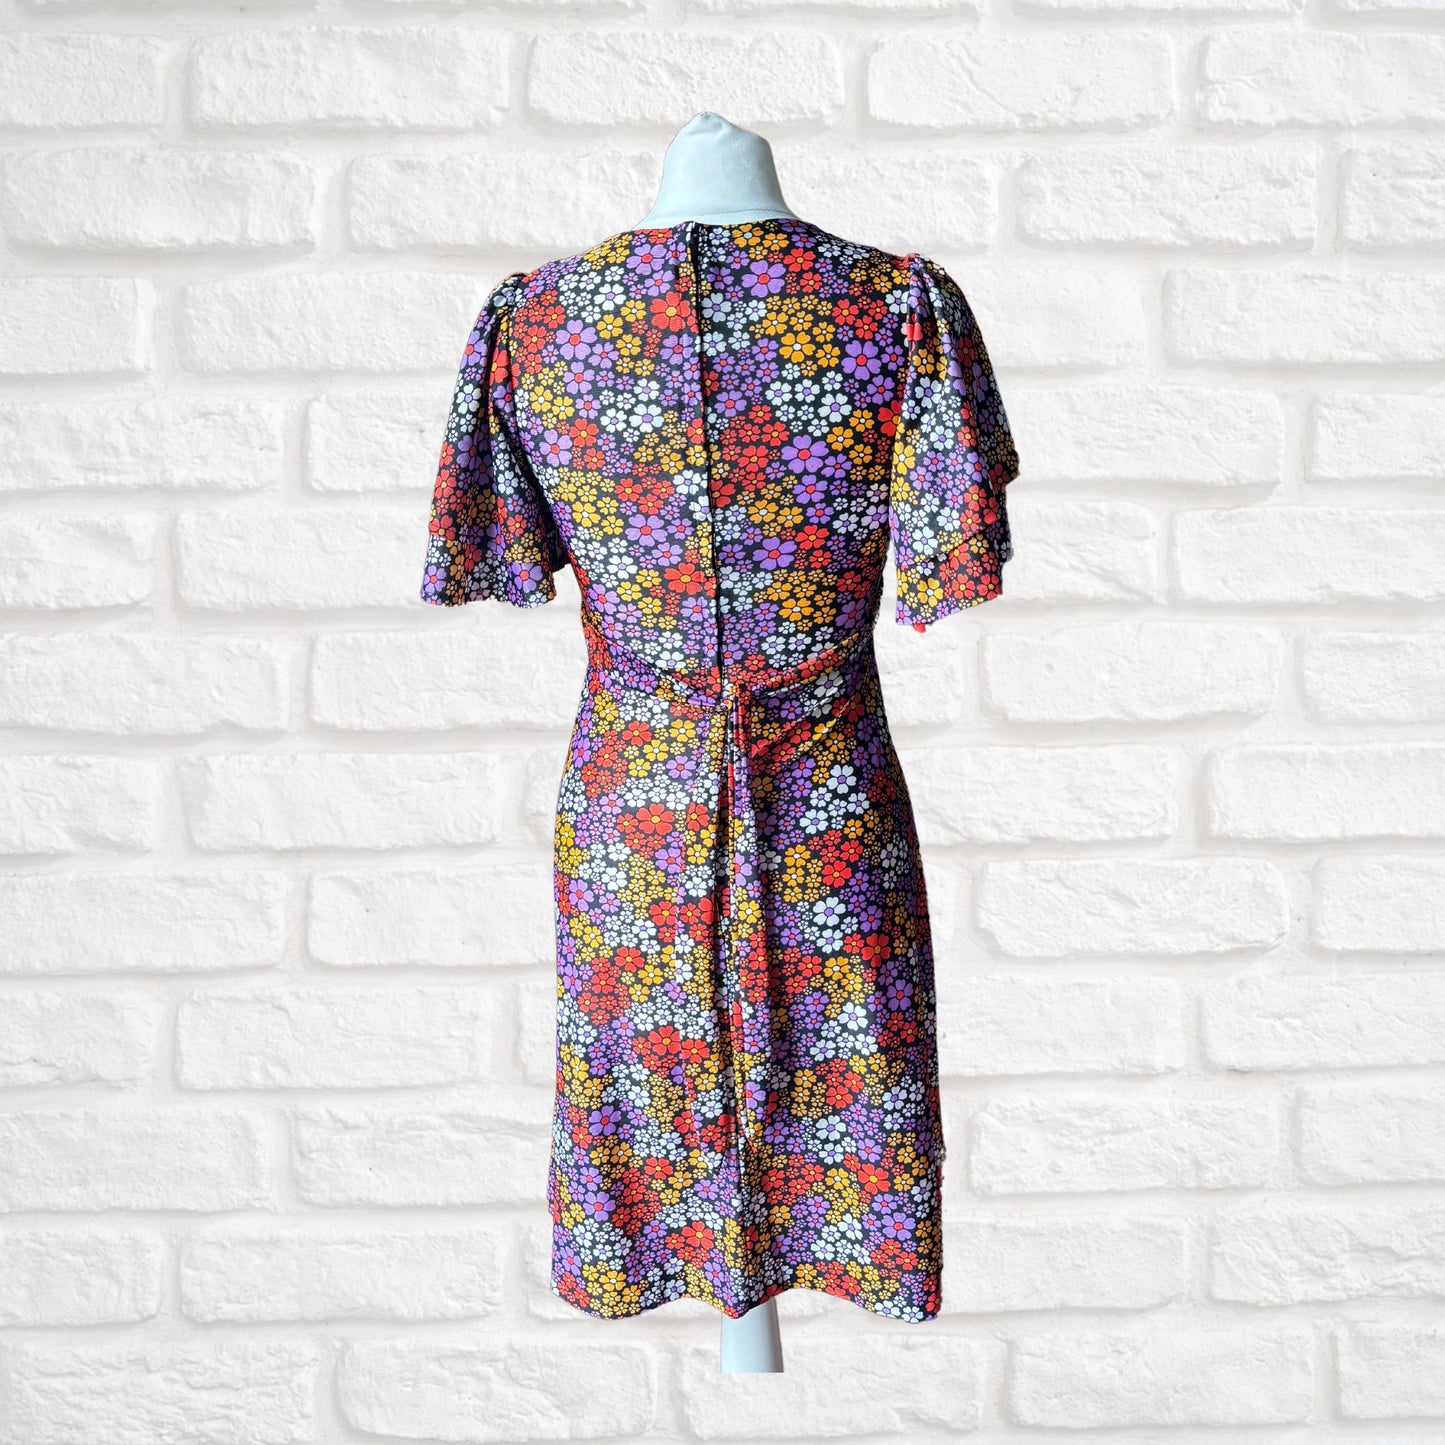 Vintage 70s Black and Bright Floral Print Dress Dress with Angel Sleeves. Approx UK size 8-10